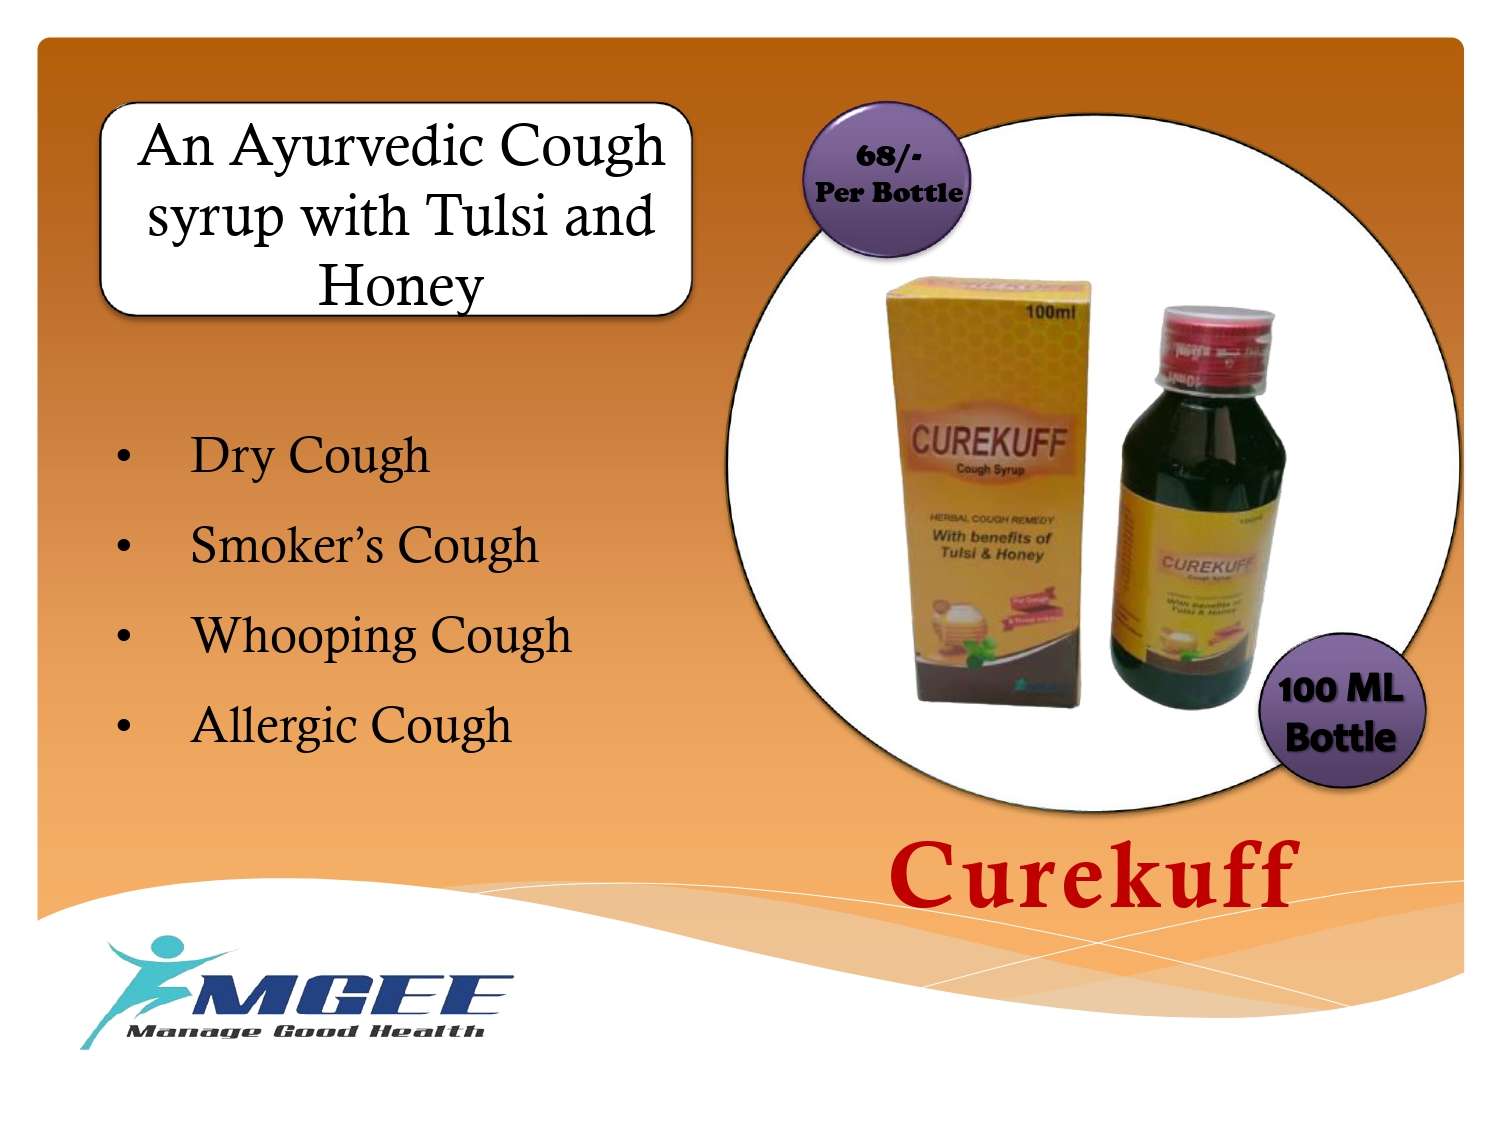 an ayurvedic cough syrup with tulsi and honey